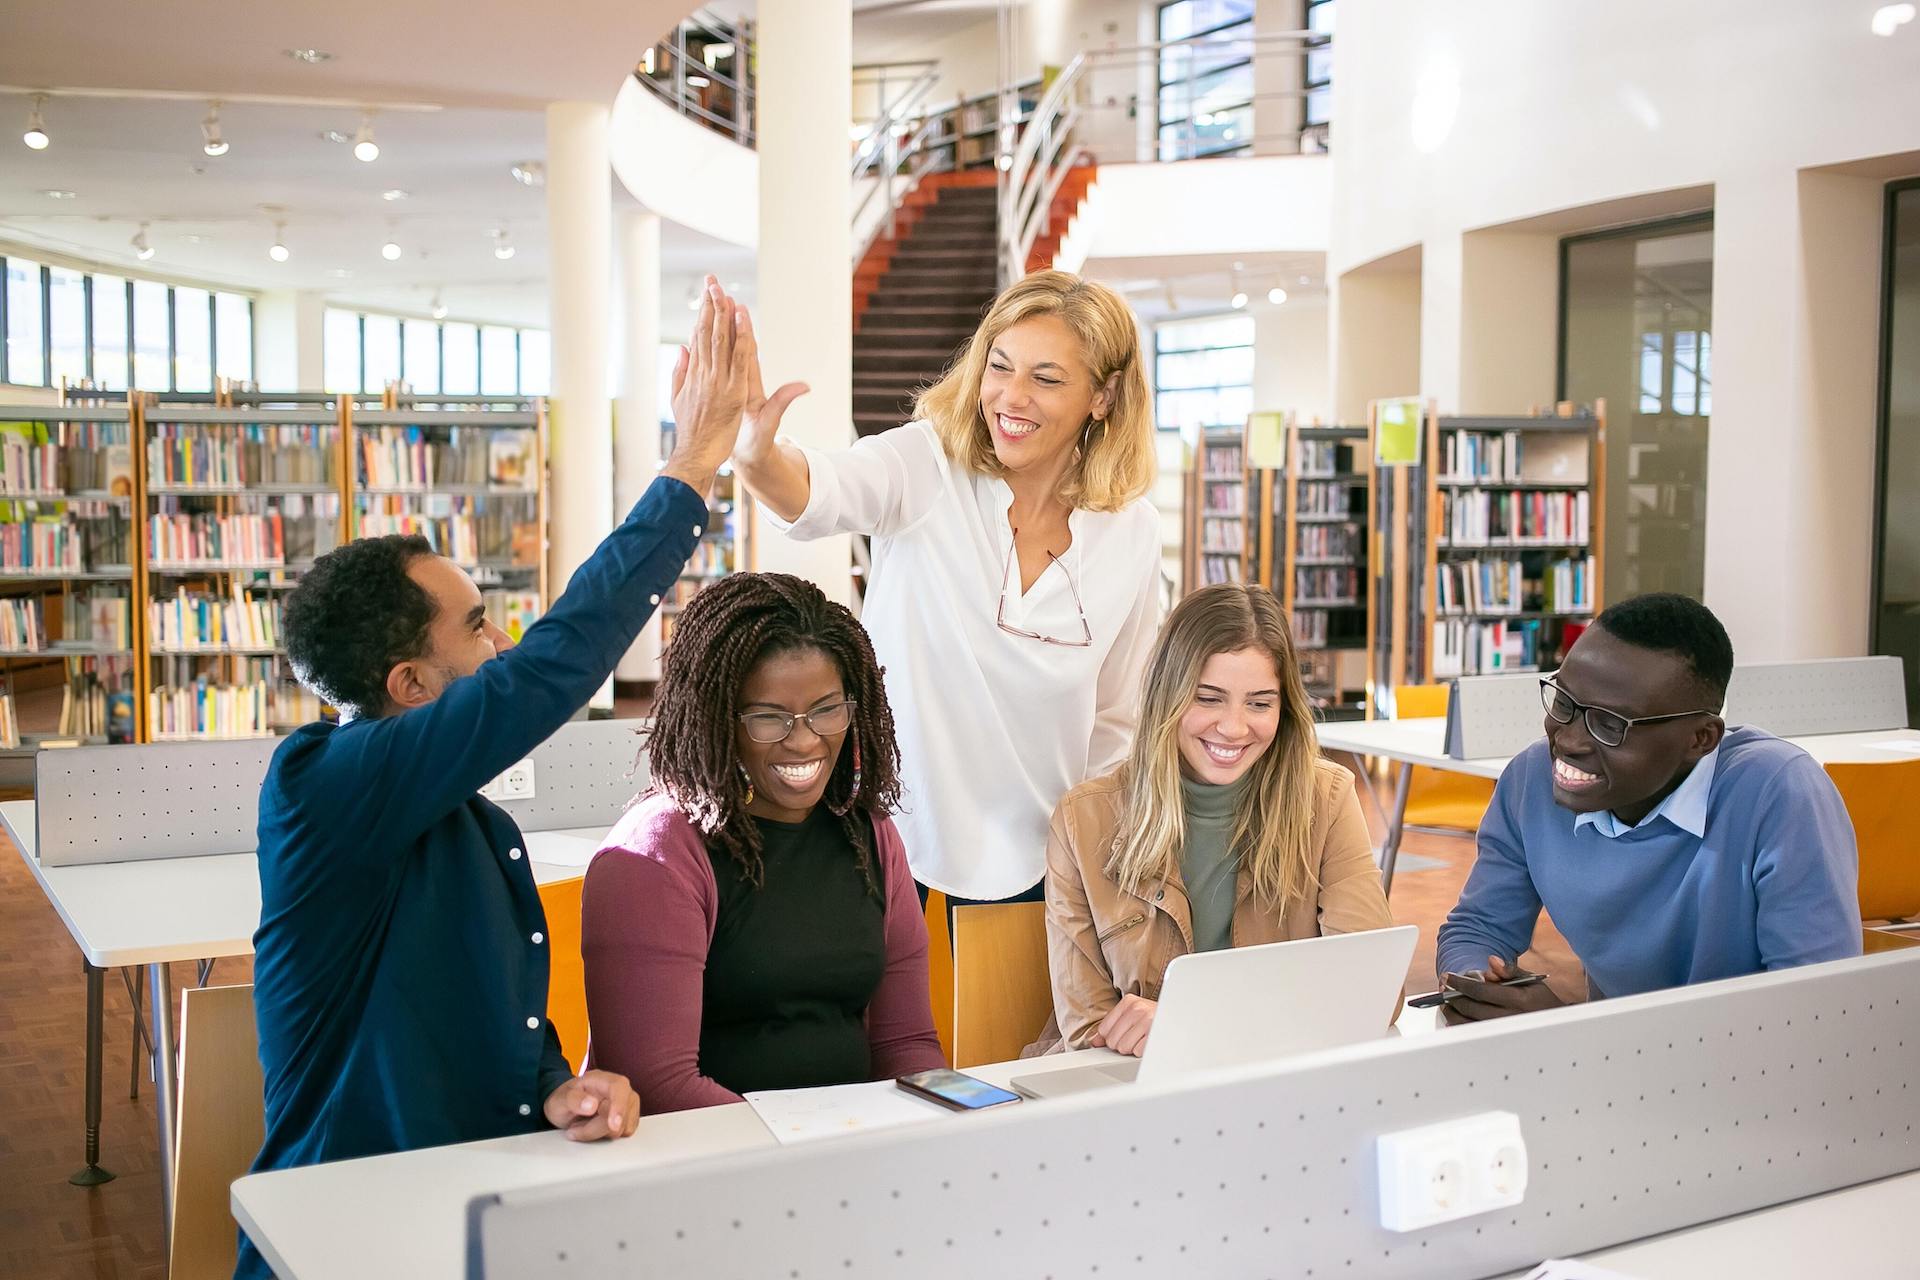 Group of people smile in library, man and woman high five